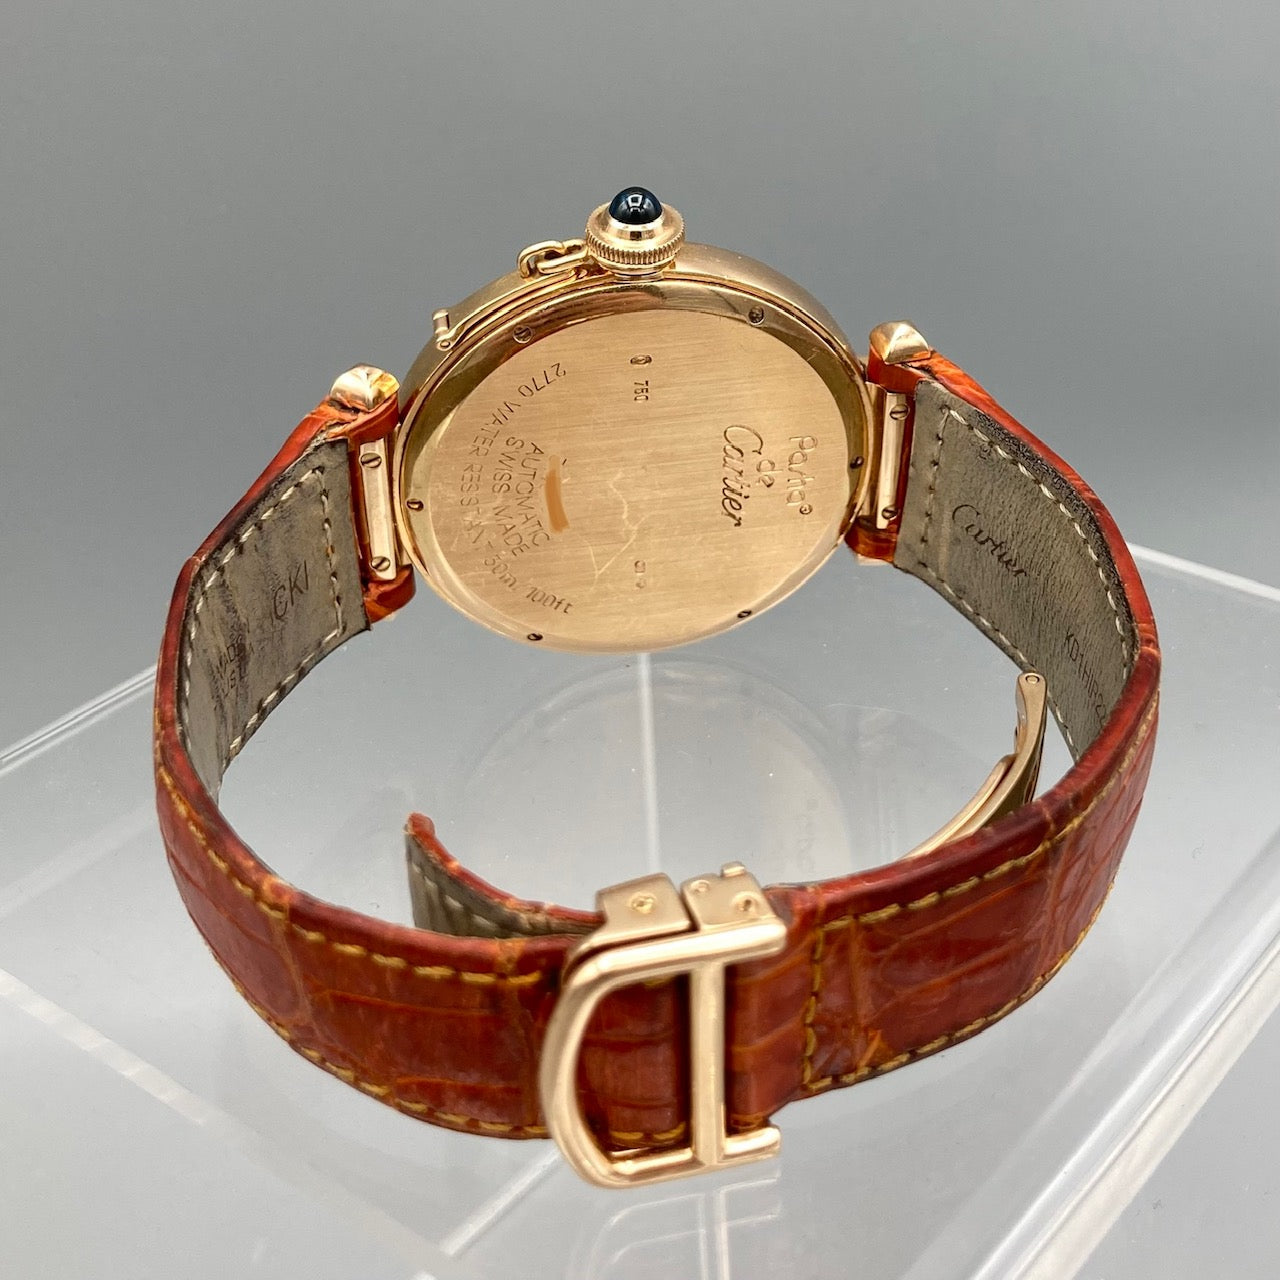 Cartier Pasha in 18k Rose Gold 42mm Leather Strap 2770